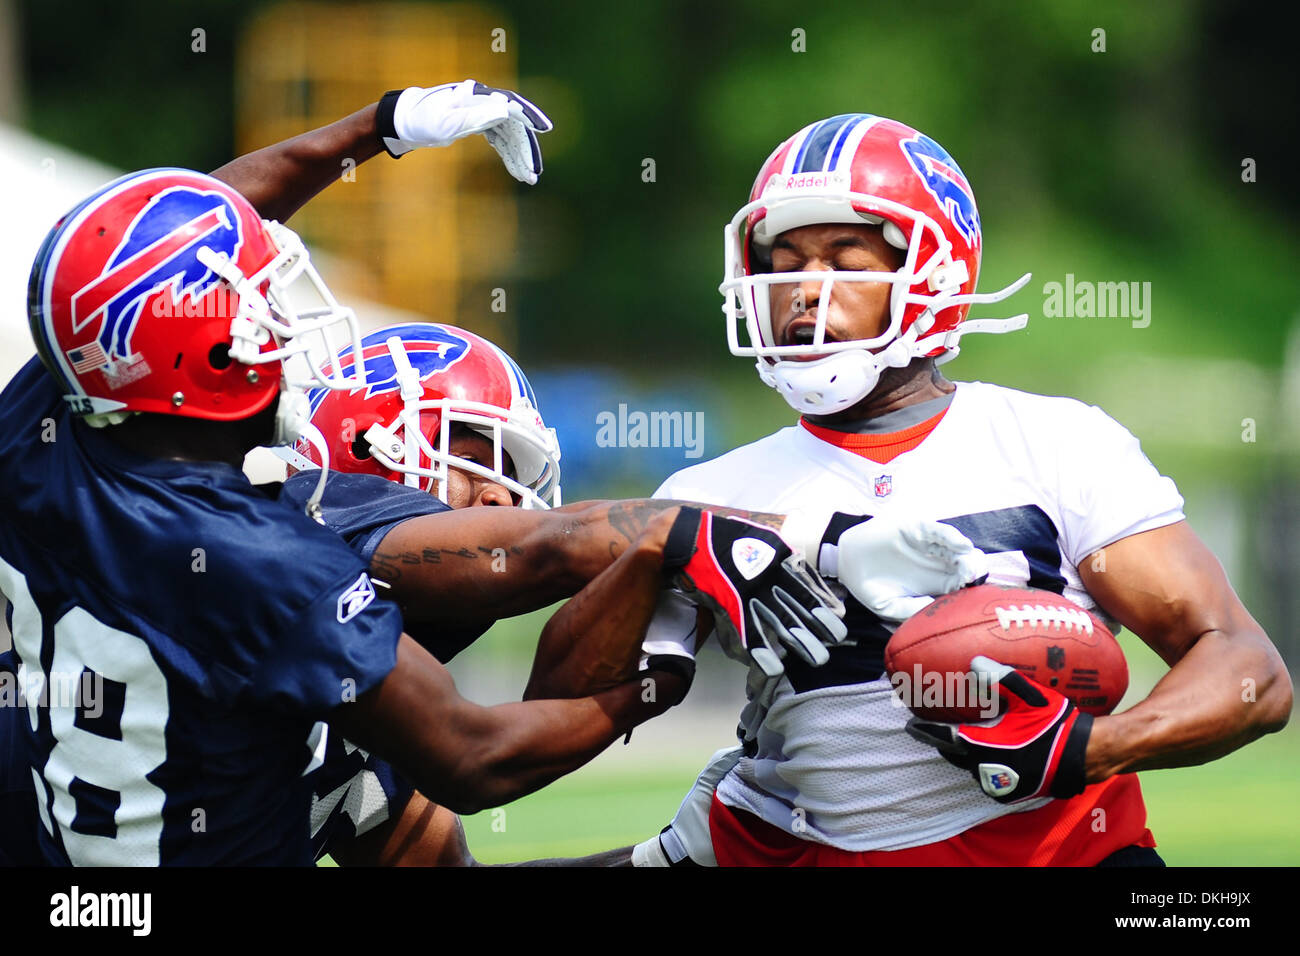 Buffalo Bills receiver Lee Evans (83) pulls in the catch over defensive backs Leodis McKelvin and Reggie Corner during training camp at St. John Fisher College in Rochester, NY. (Credit Image: © Michael Johnson/Southcreek Global/ZUMApress.com) Stock Photo